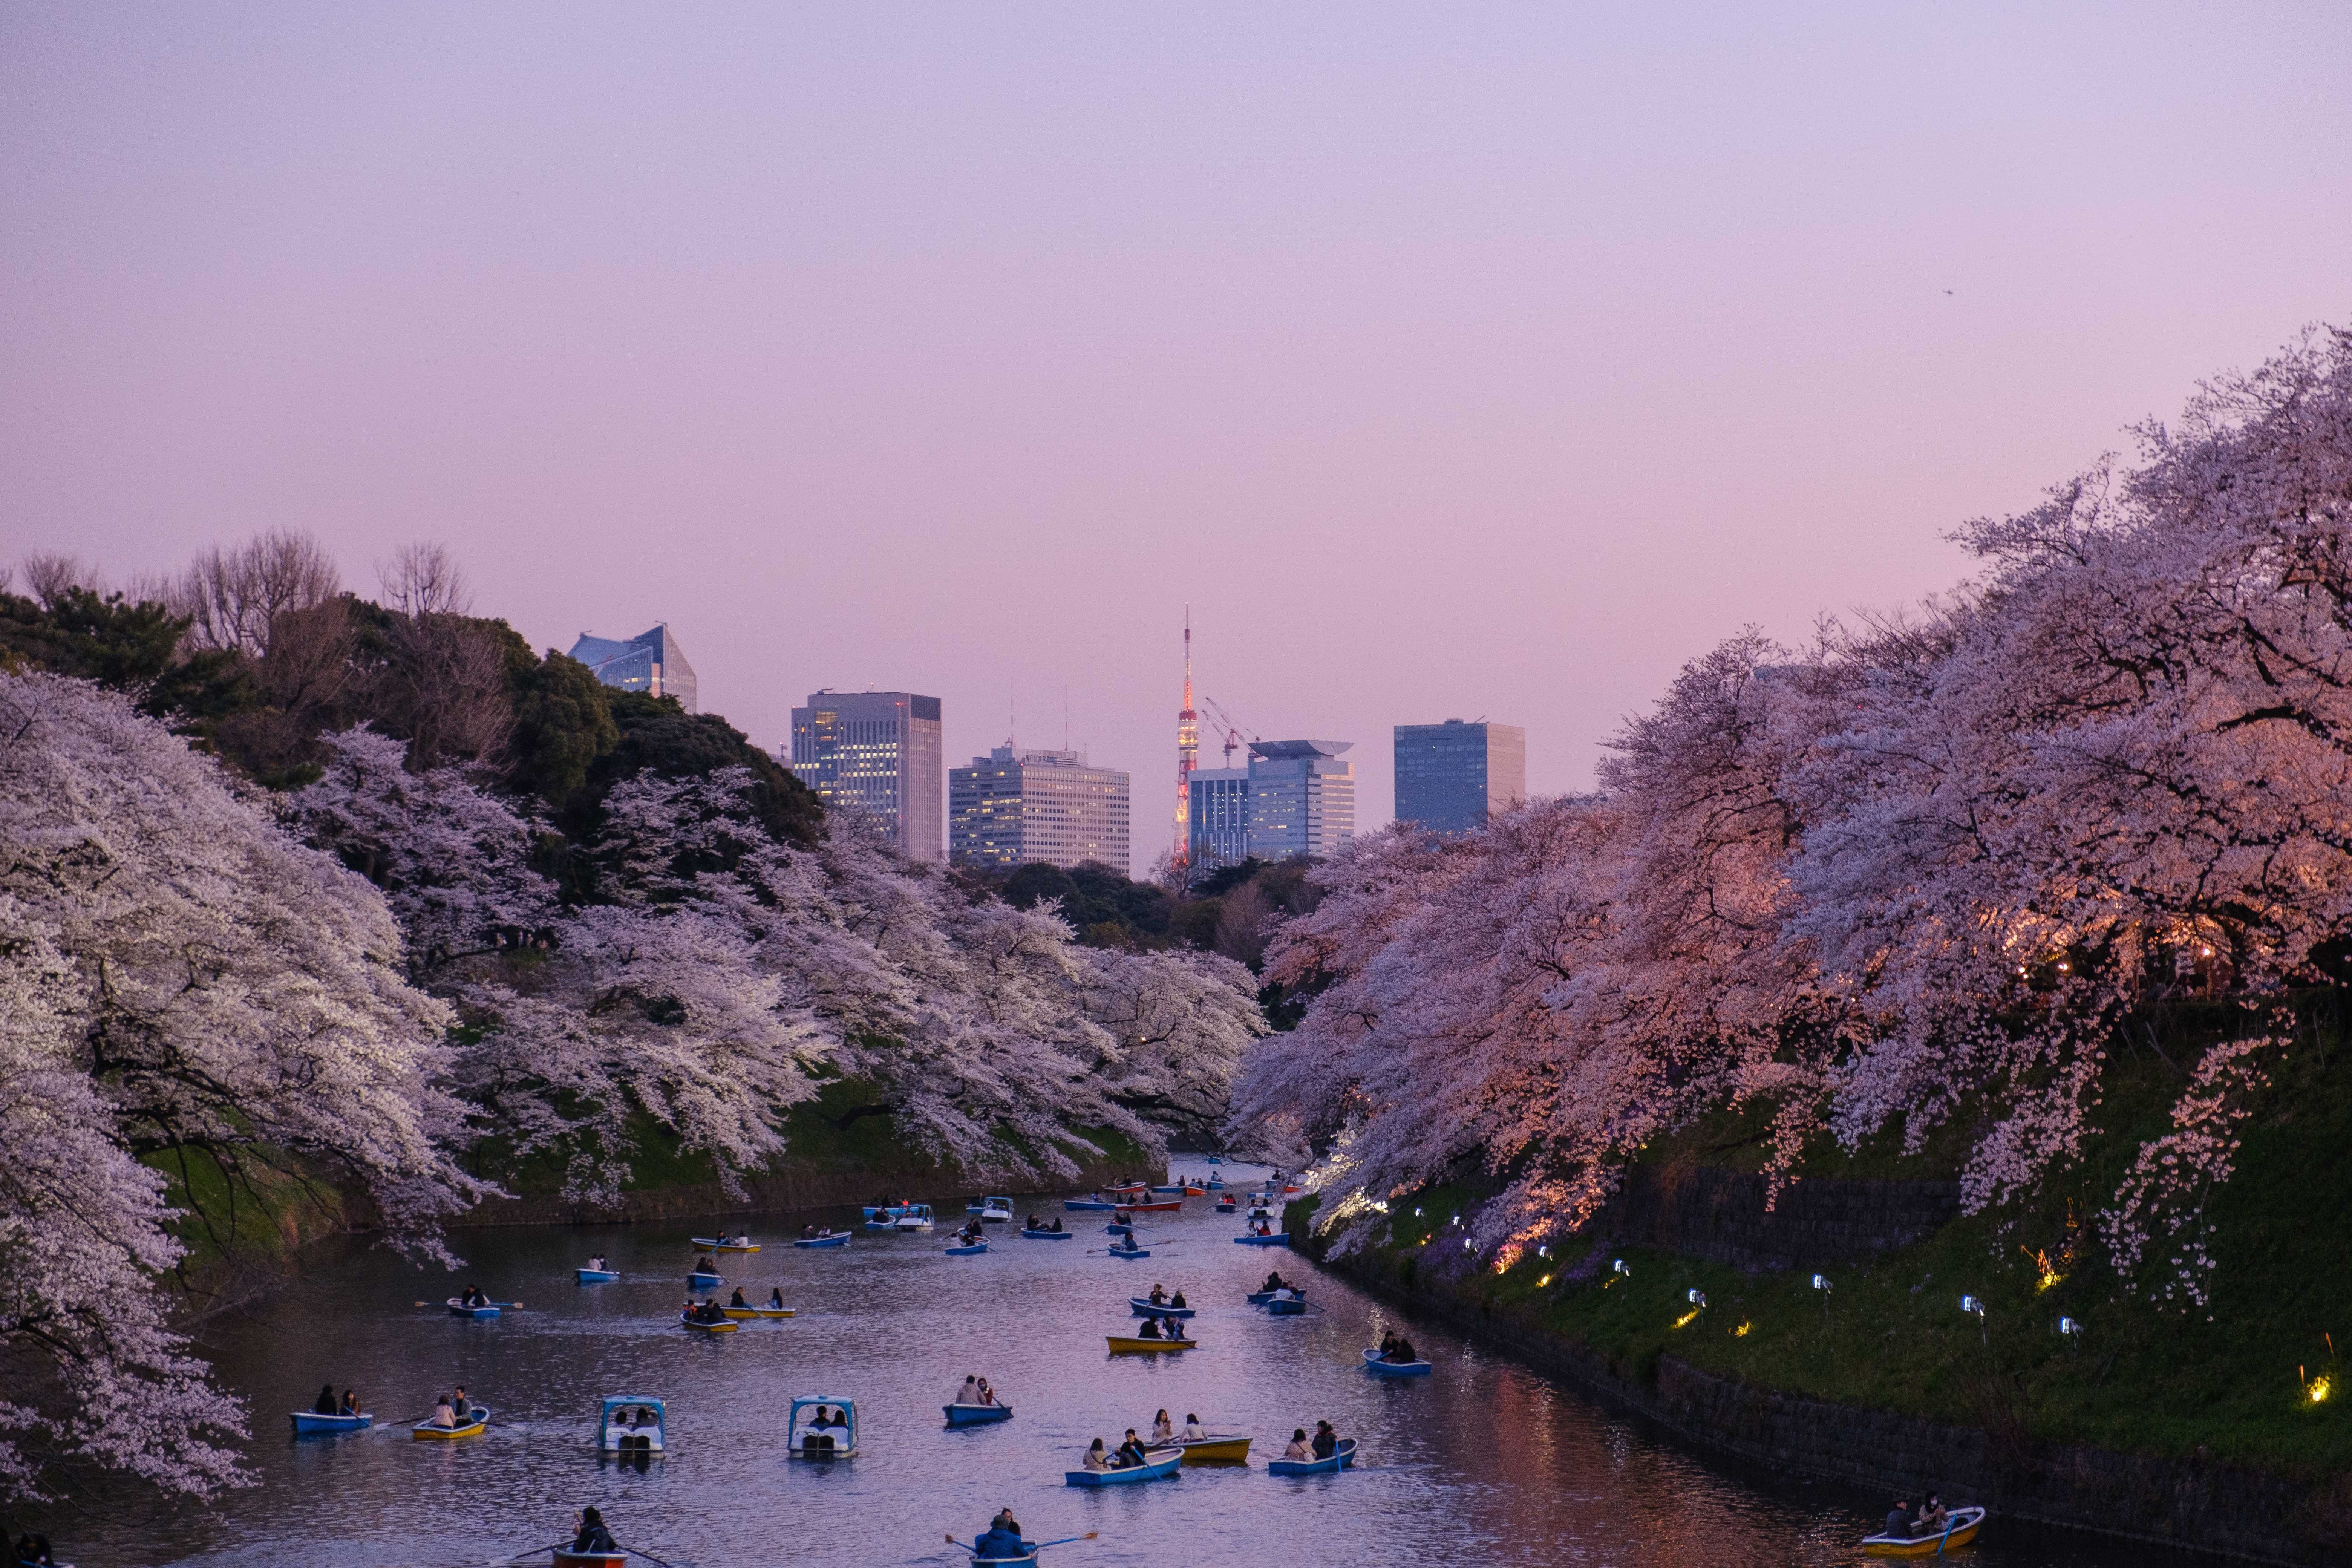 An image of a moat with boats and cherry blossoms on the banks, with Tokyo tower in the background.